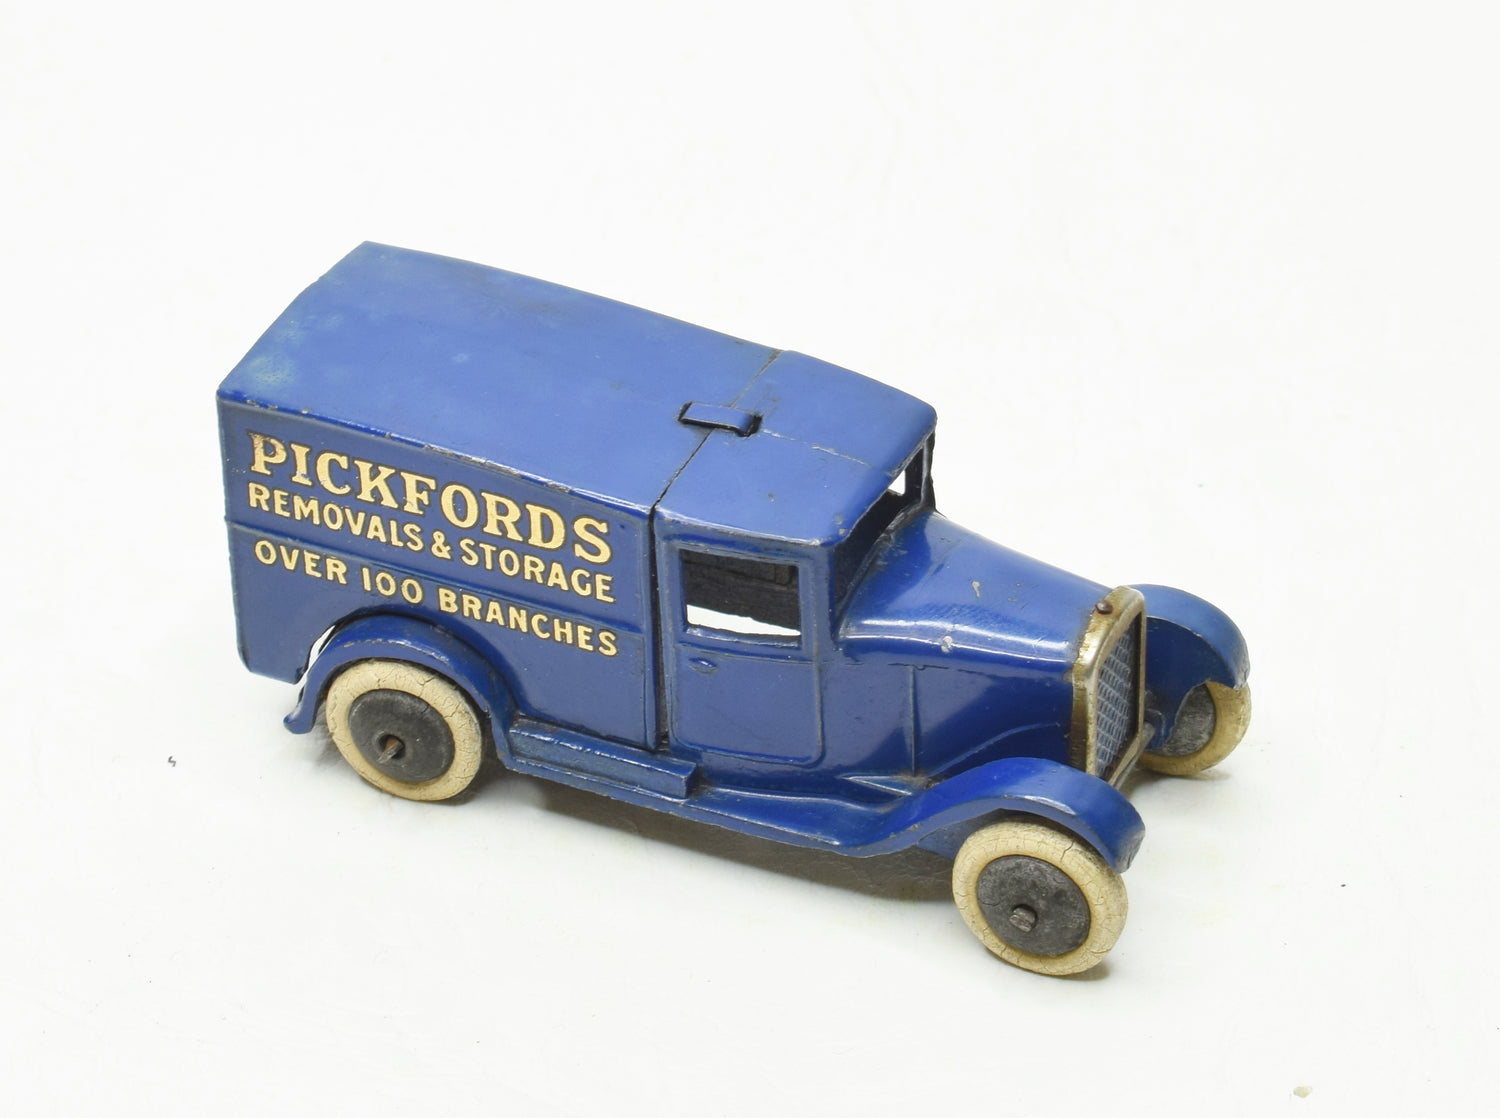 Dinky Toys 28b 'Pickfords' Type 1 Delivery Van Very Near/Mint